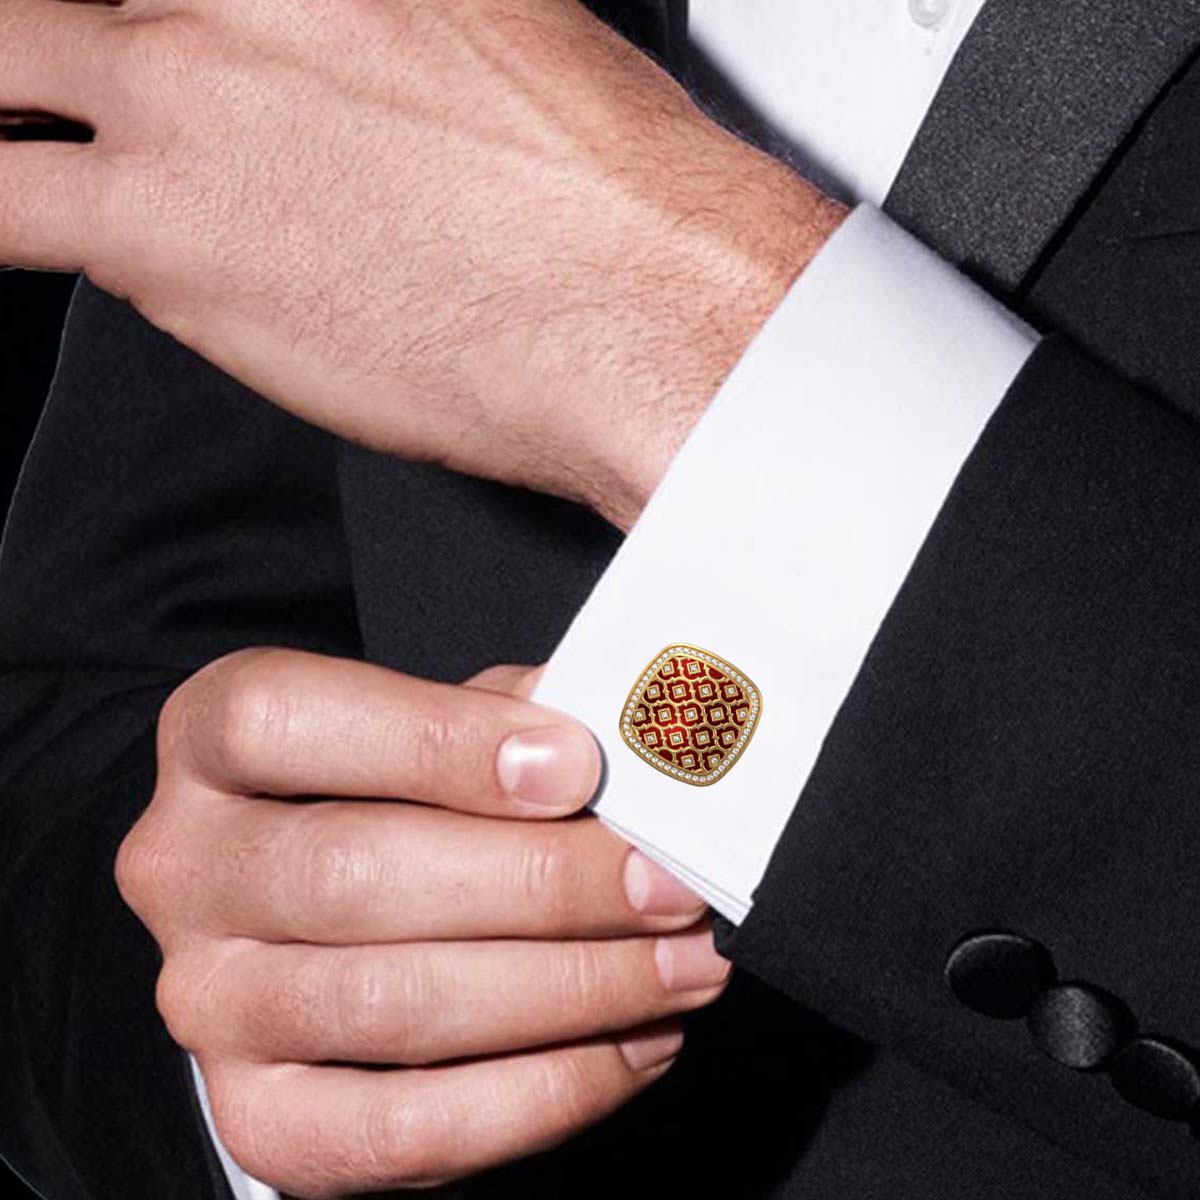 Ornate Luxe, Classic Cufflink Set with CZ Diamonds, 18kt Gold Plating and Enamel on Brass.